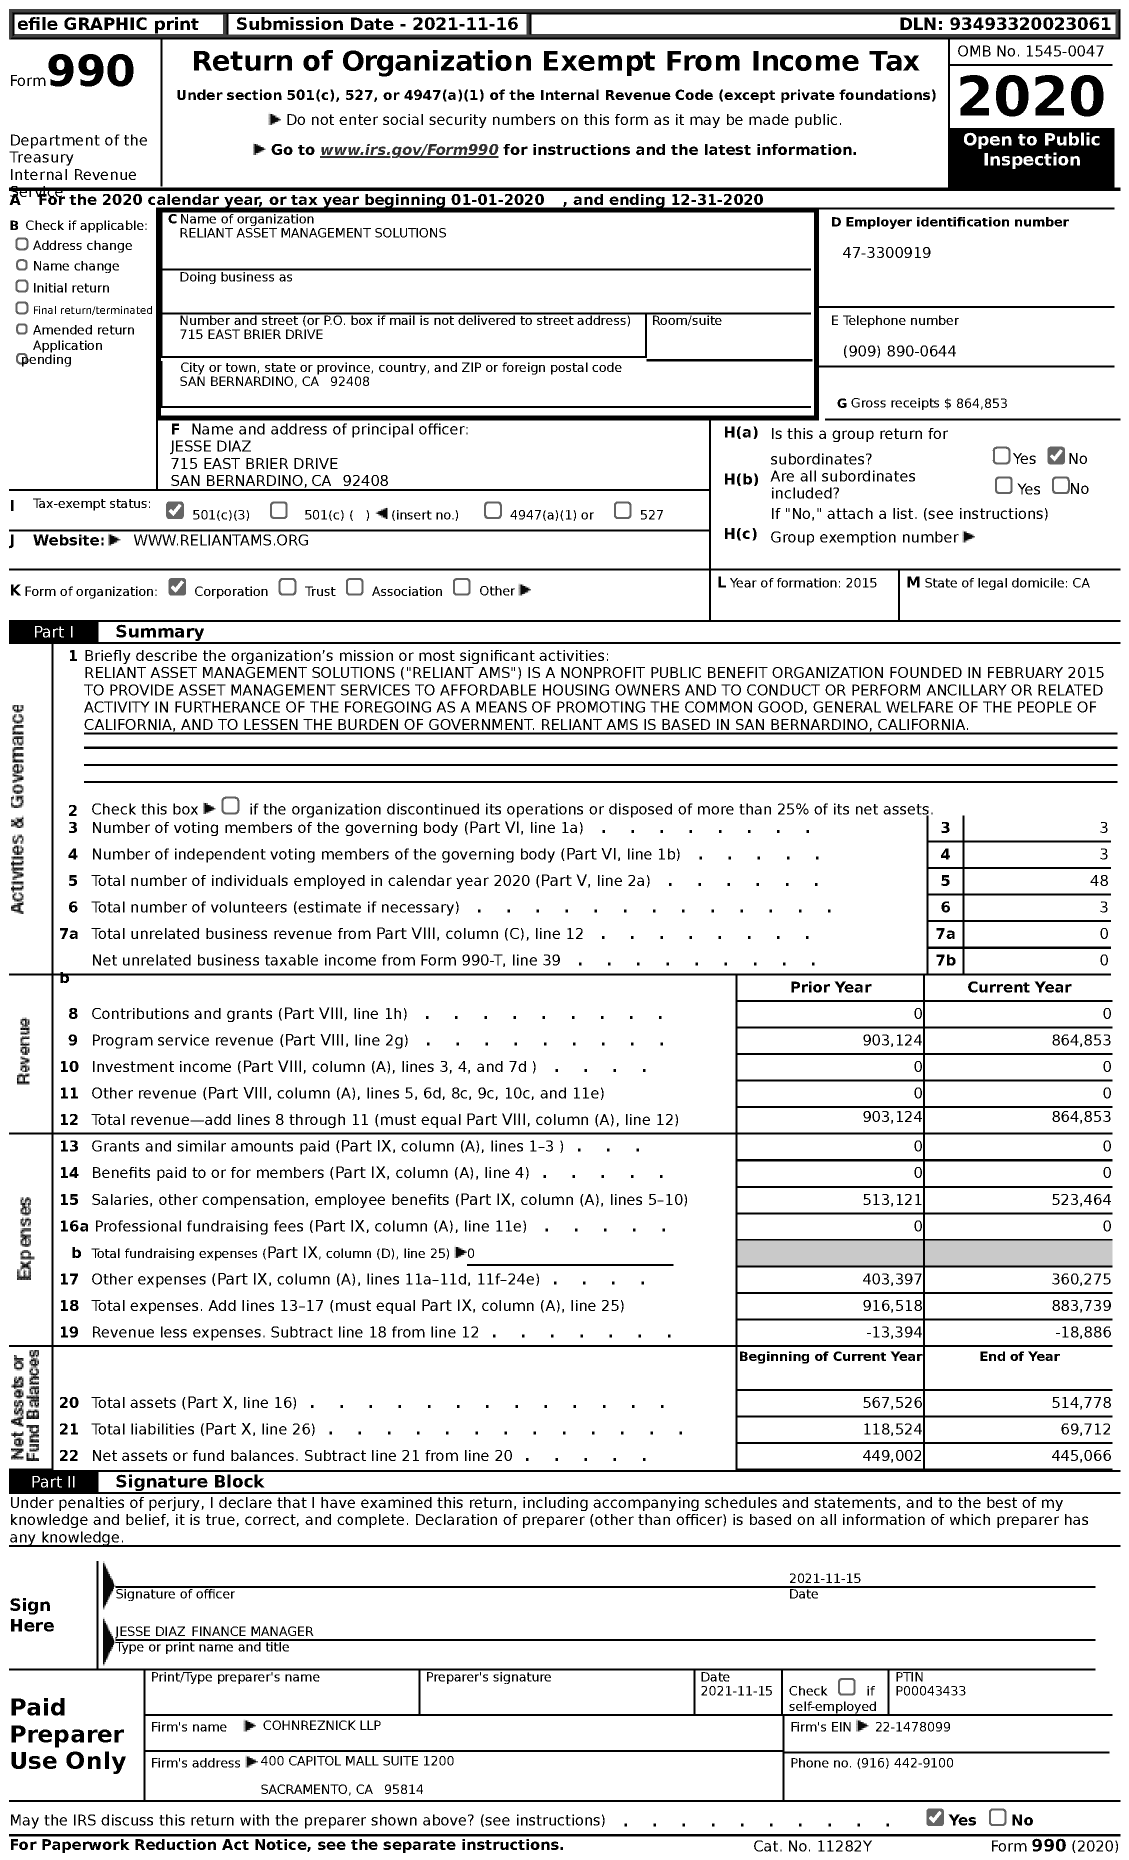 Image of first page of 2020 Form 990 for Reliant Asset Management Solutions